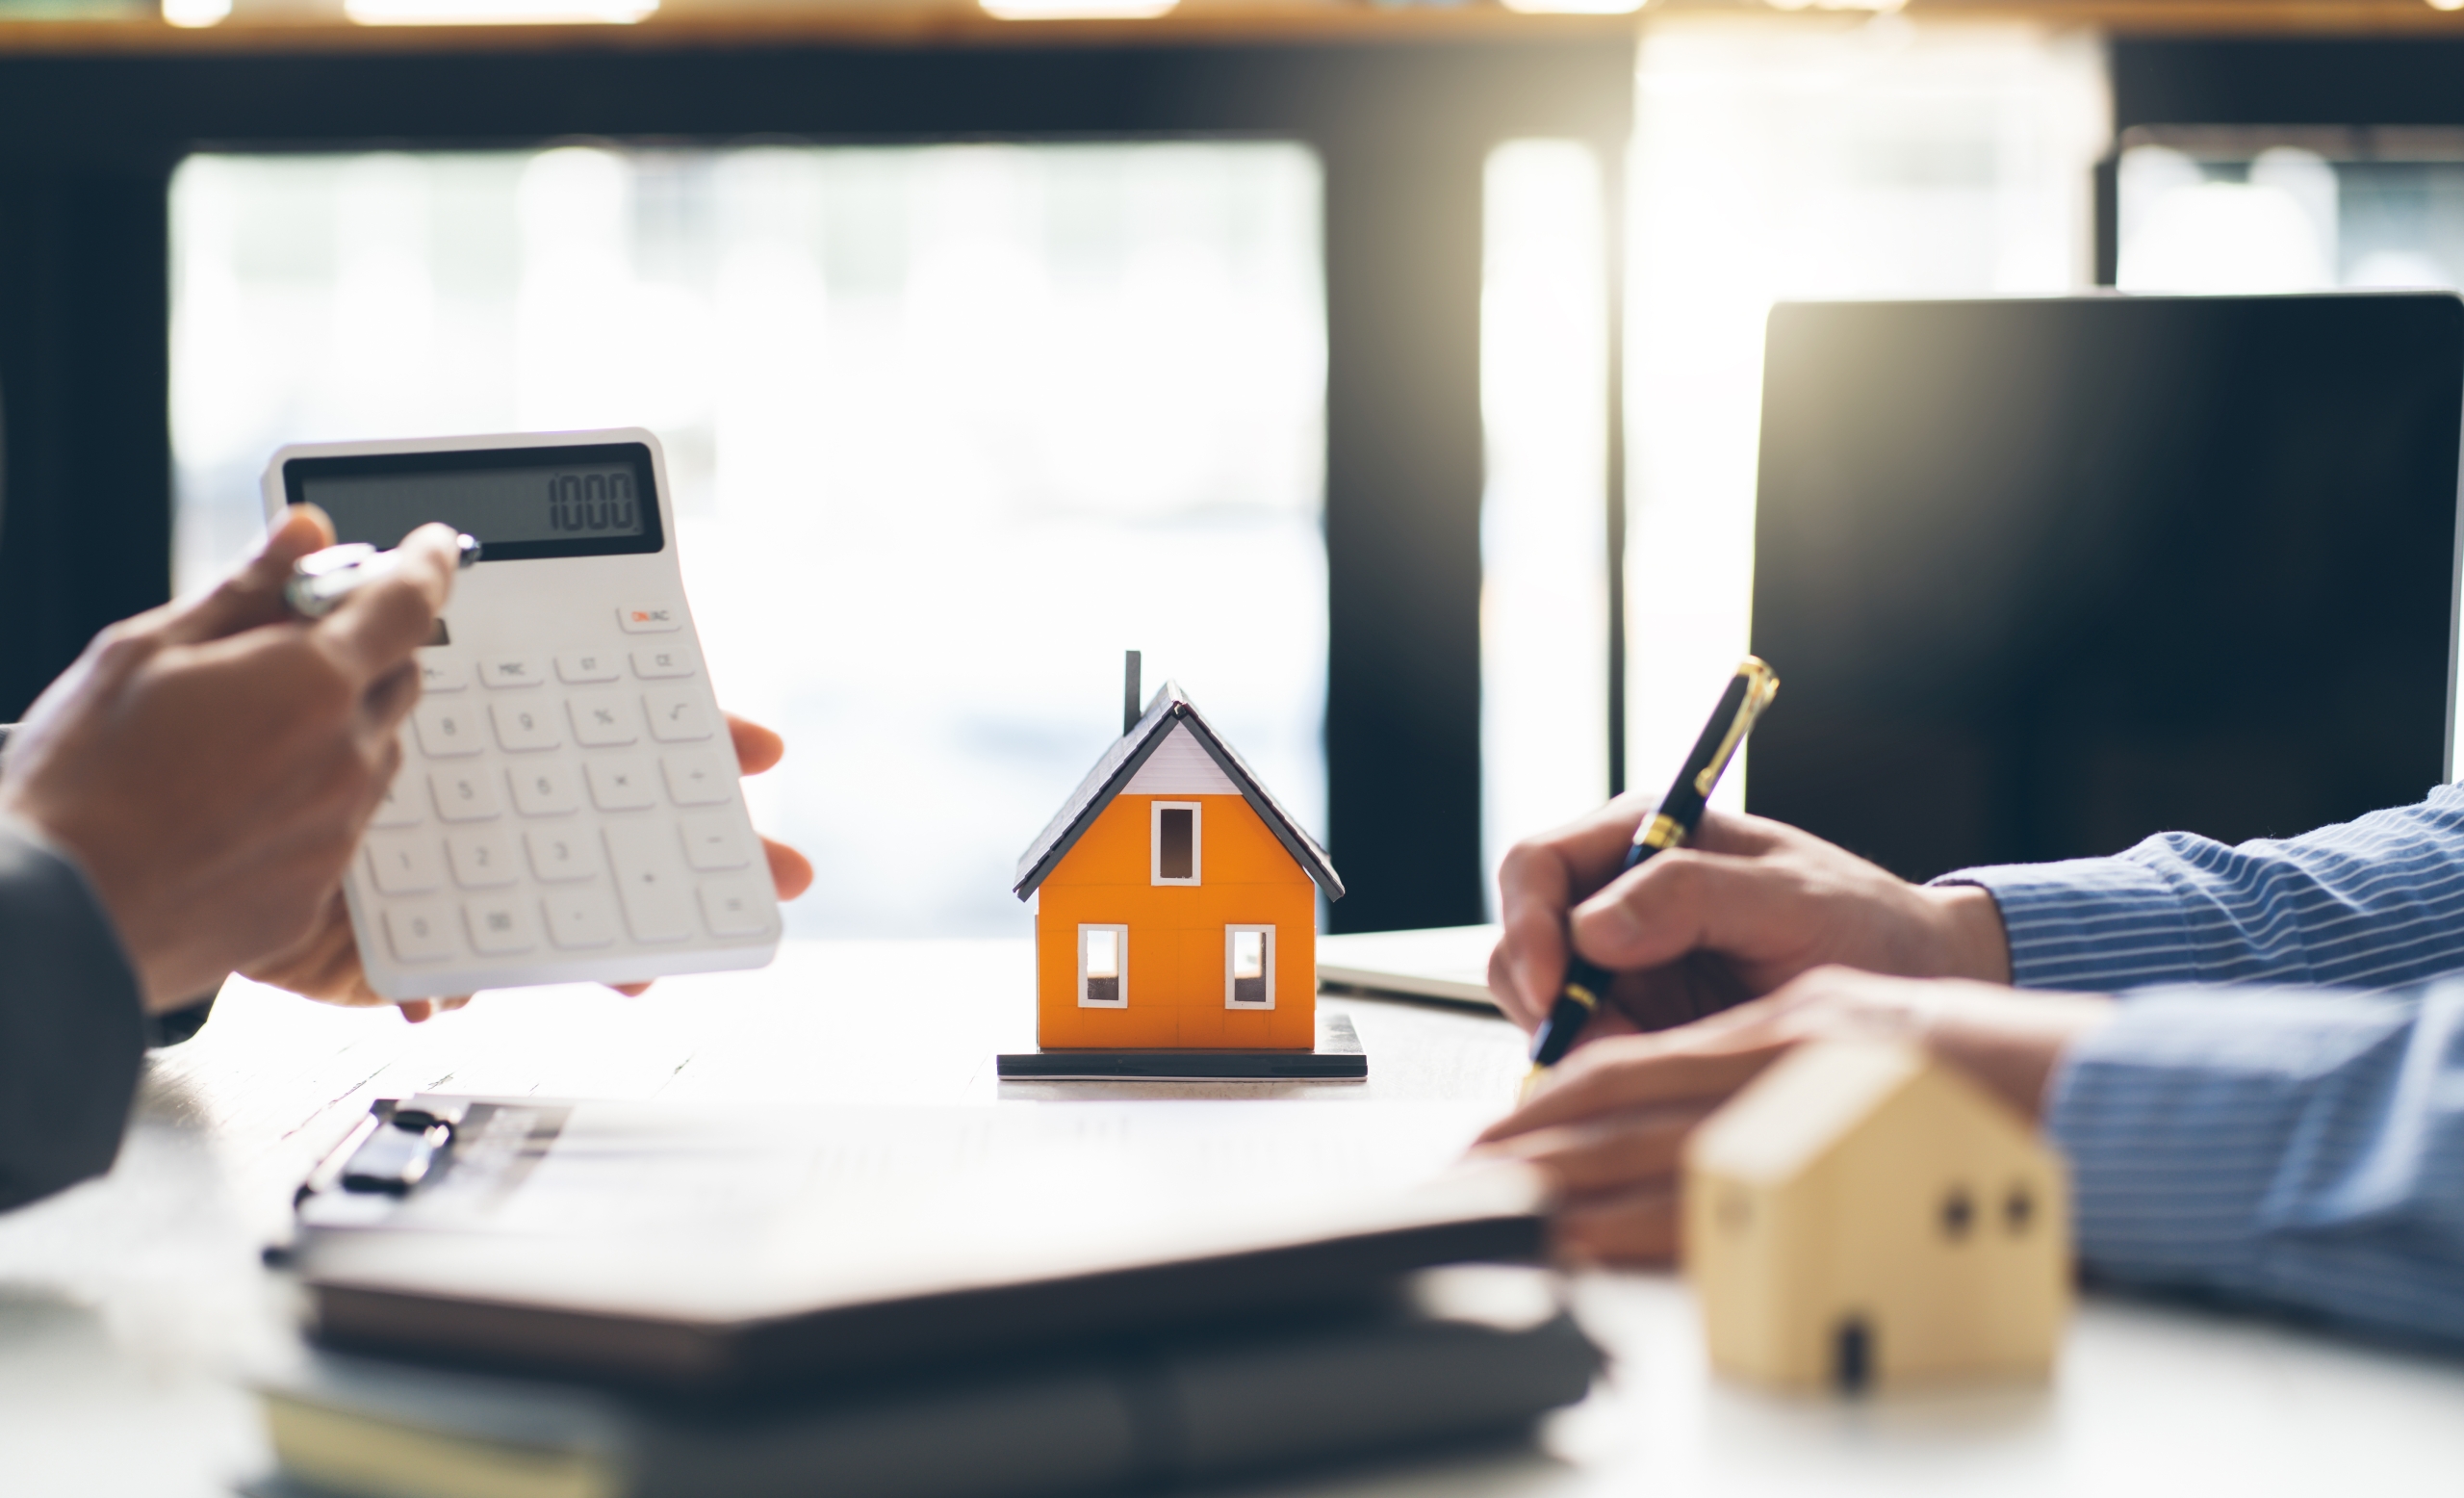 A mortgage broker is explaining how switching to a fortnightly repayment will help a home loan borrower save on interest.